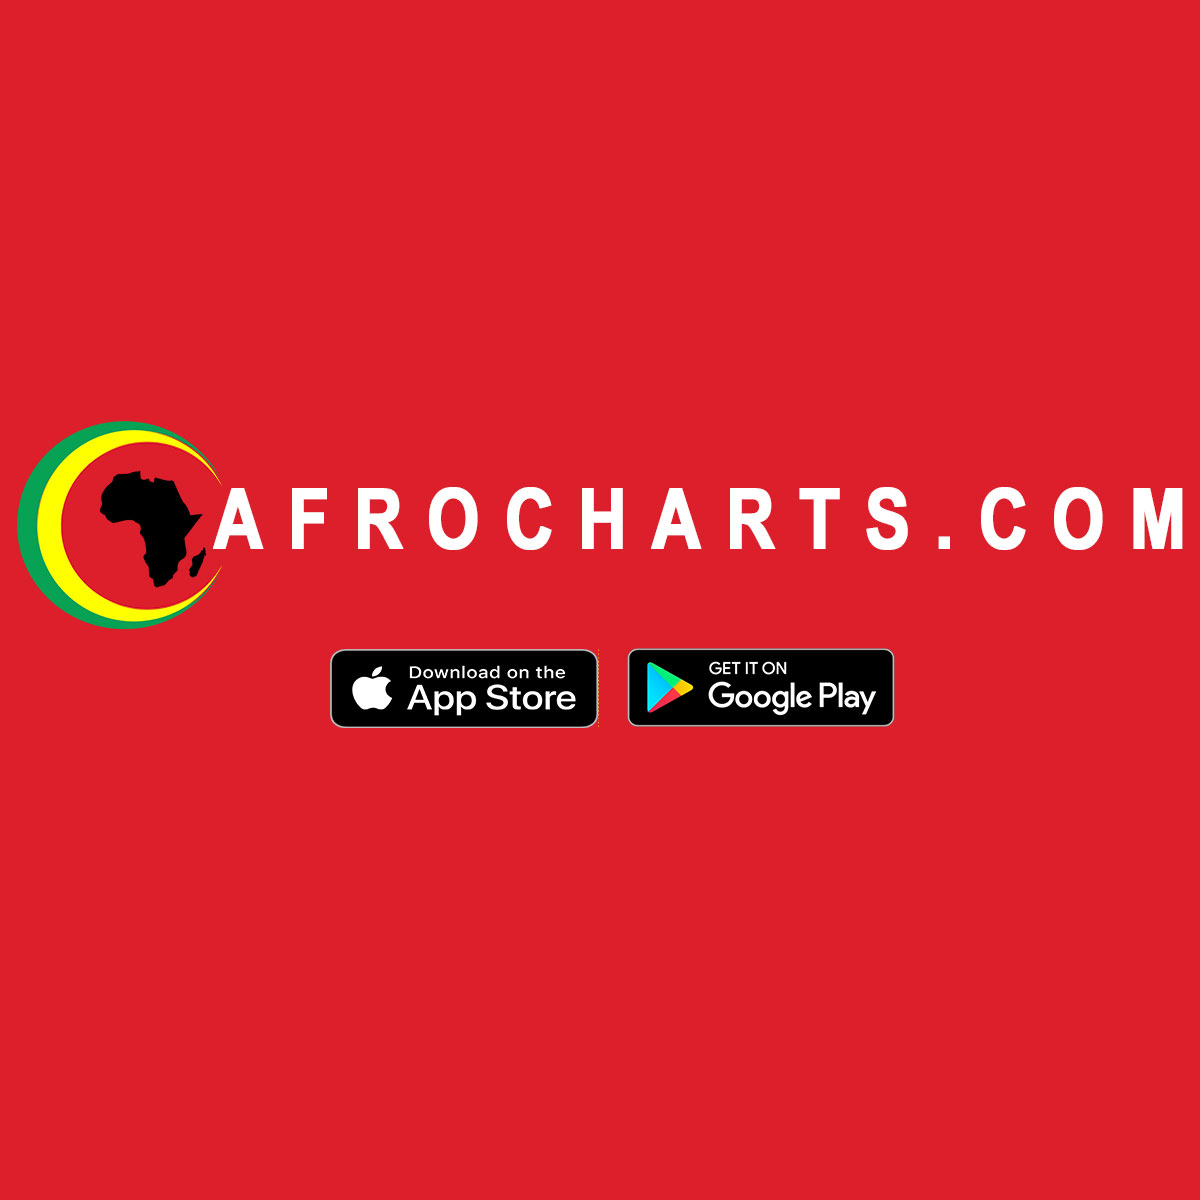 Introducing AfroCharts - the African Music Streaming and Downloading Platform